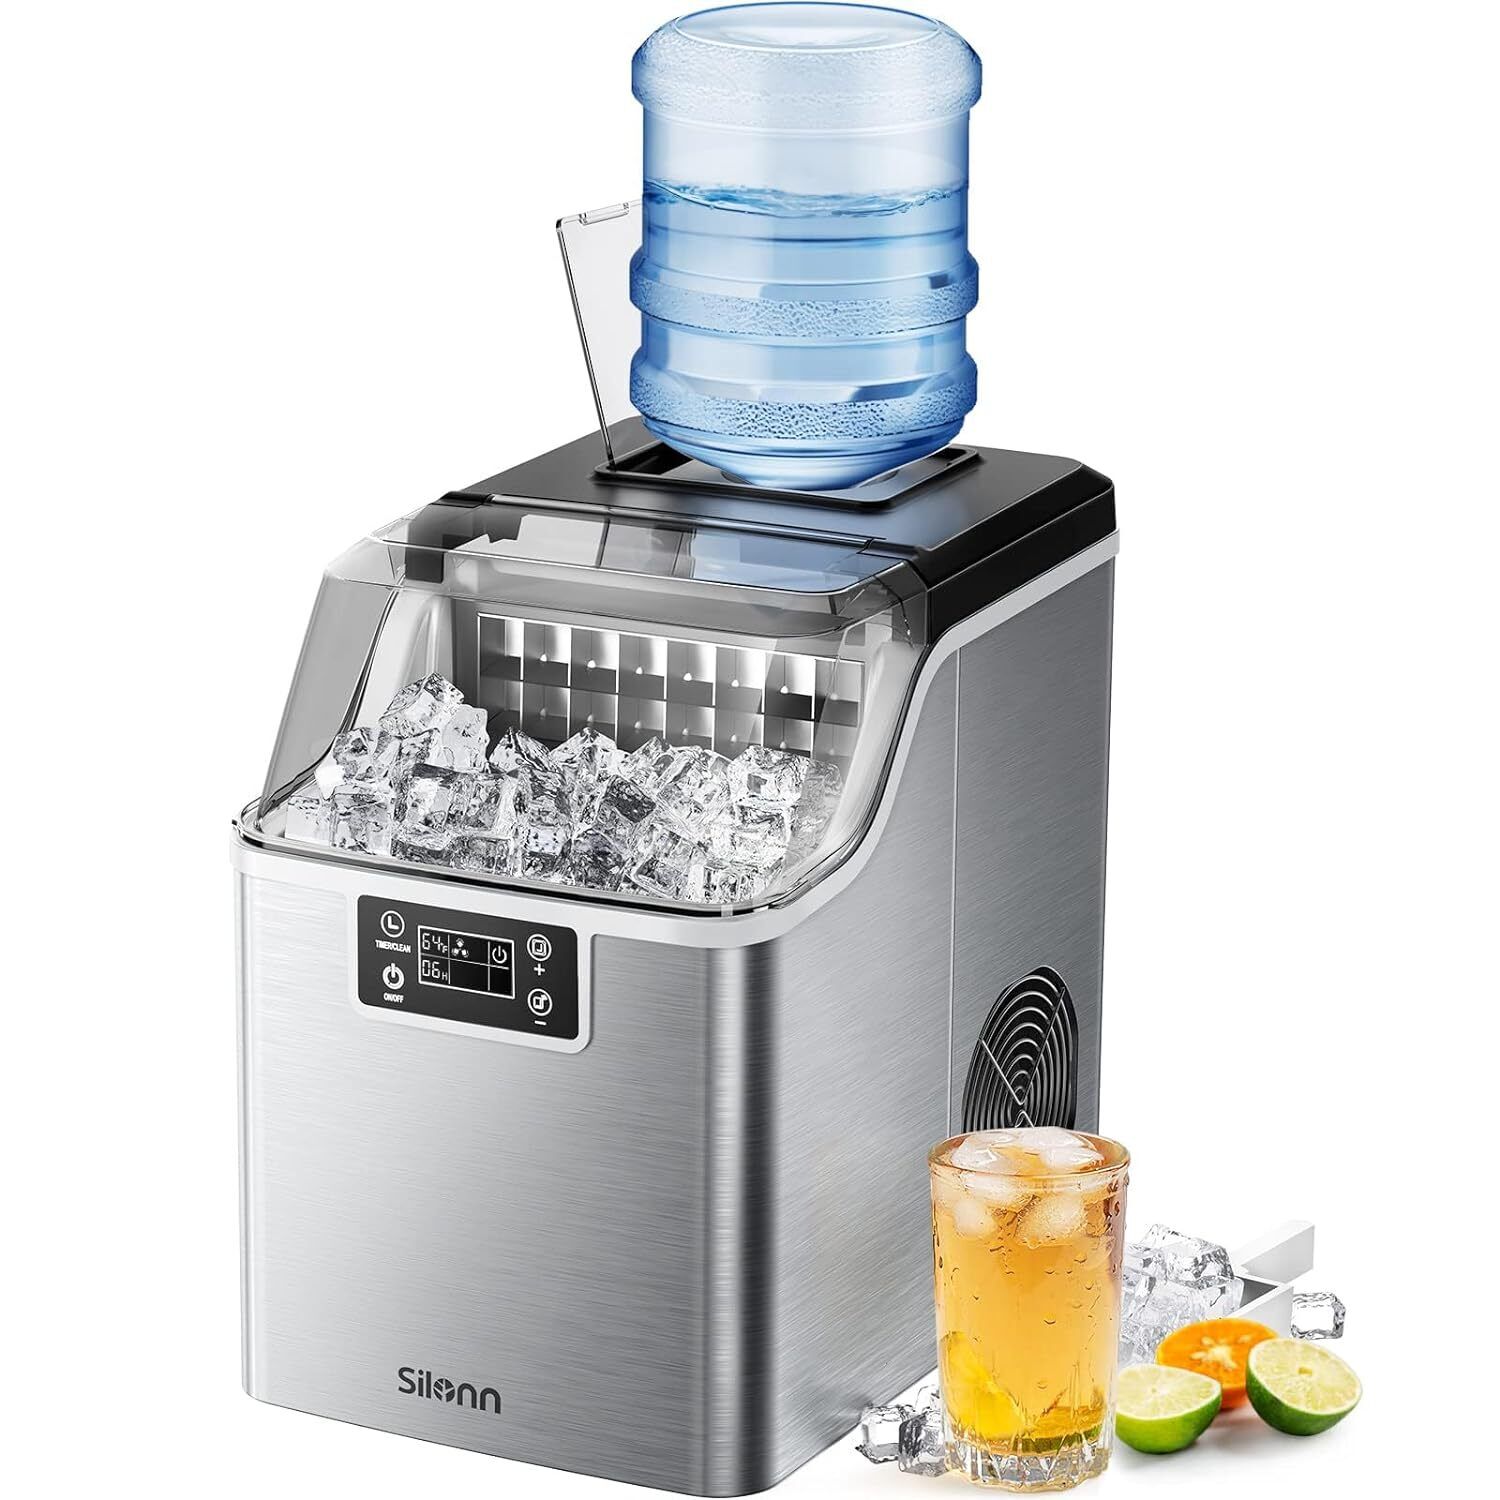 Countertop Ice Maker, 45lbs Per Day, 24Pcs Ice Cubes in 13 Min, 2 Ways to Add 